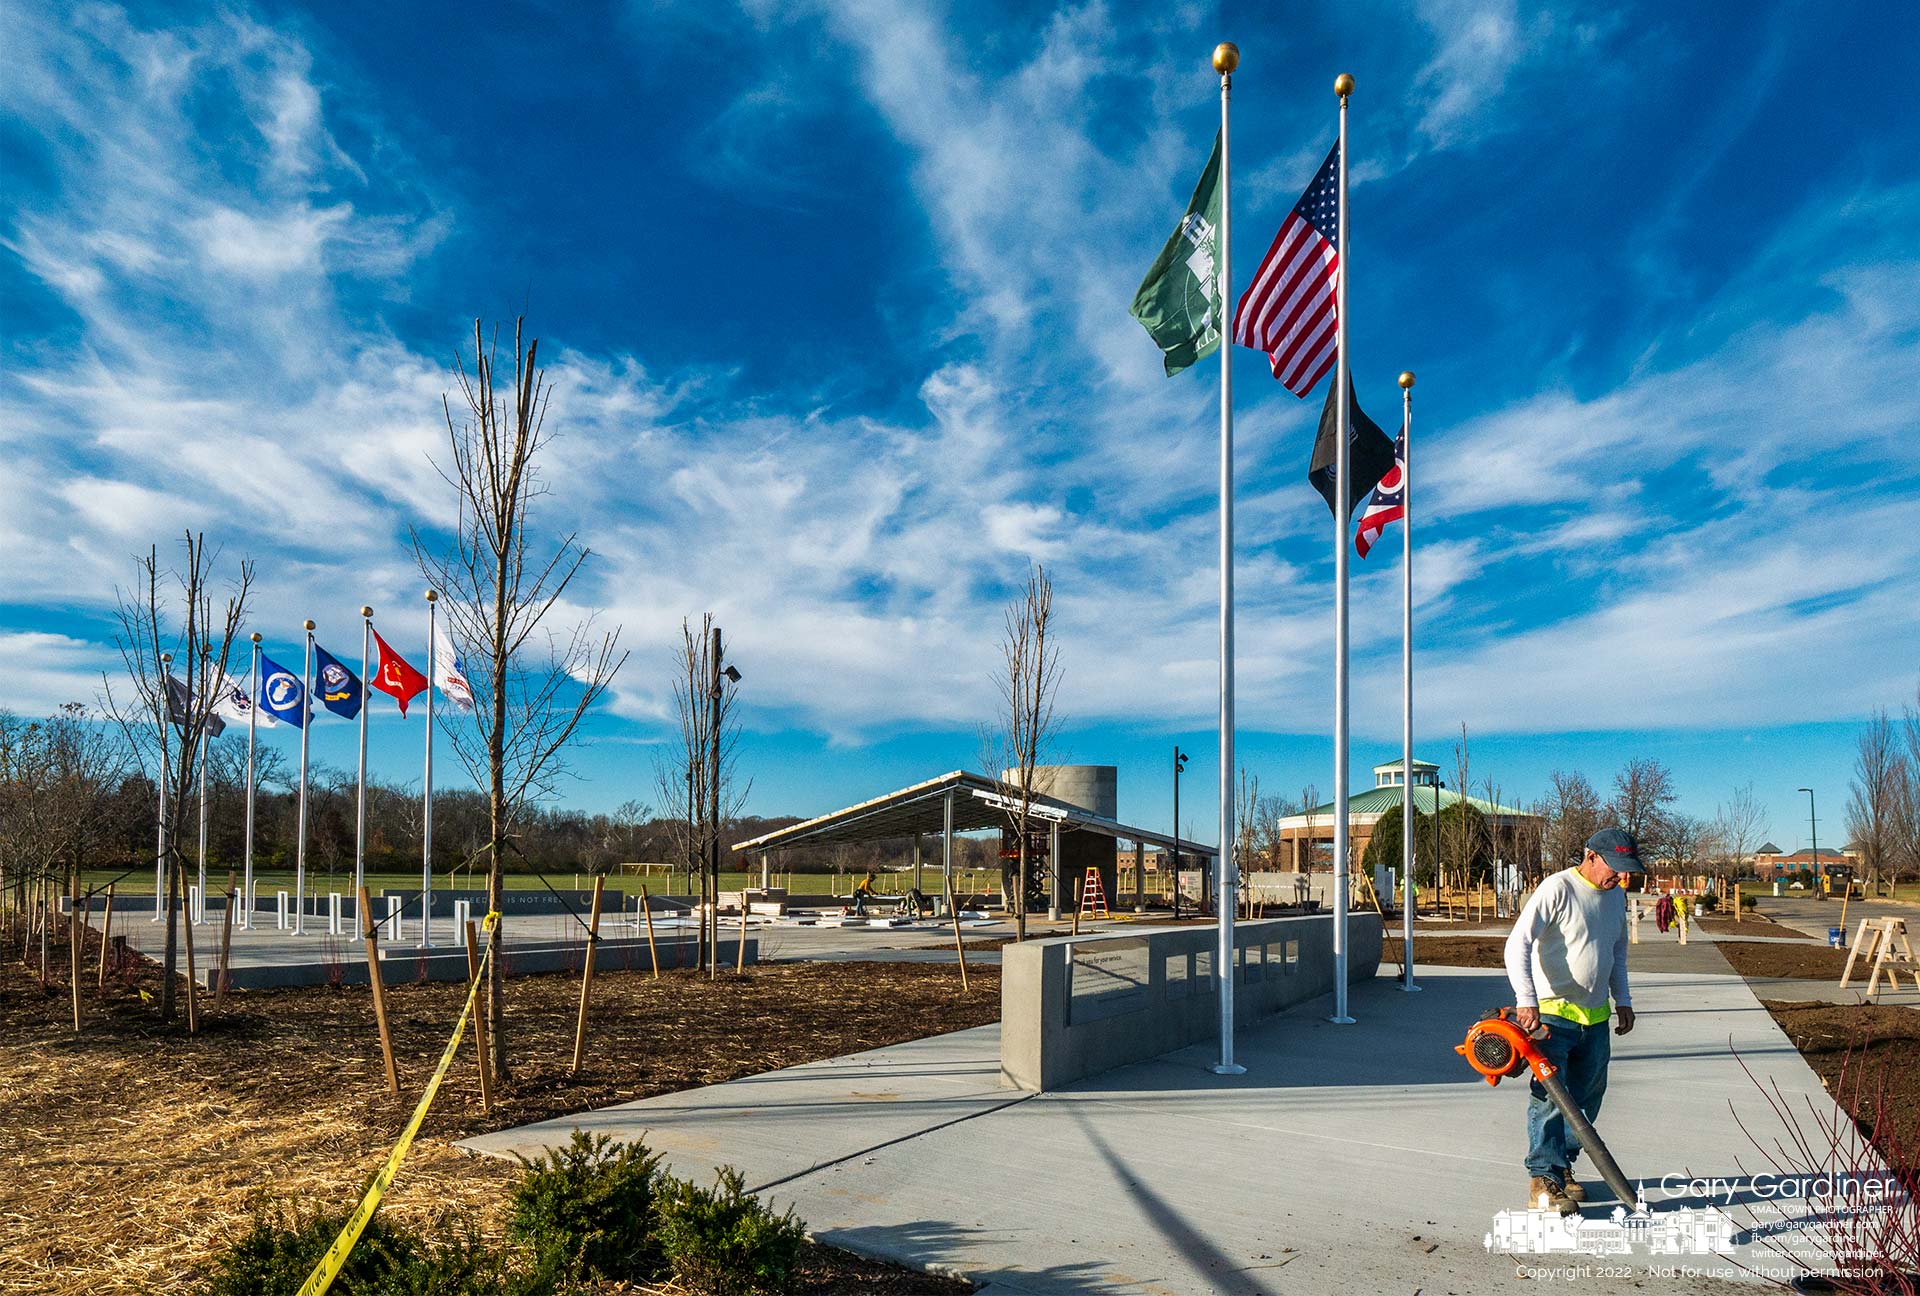 Newly raised flags blow in the breeze as workers ready the partially completed Veterans Memorial for its de3dication on Friday. My Final Photo for November 9, 2022.